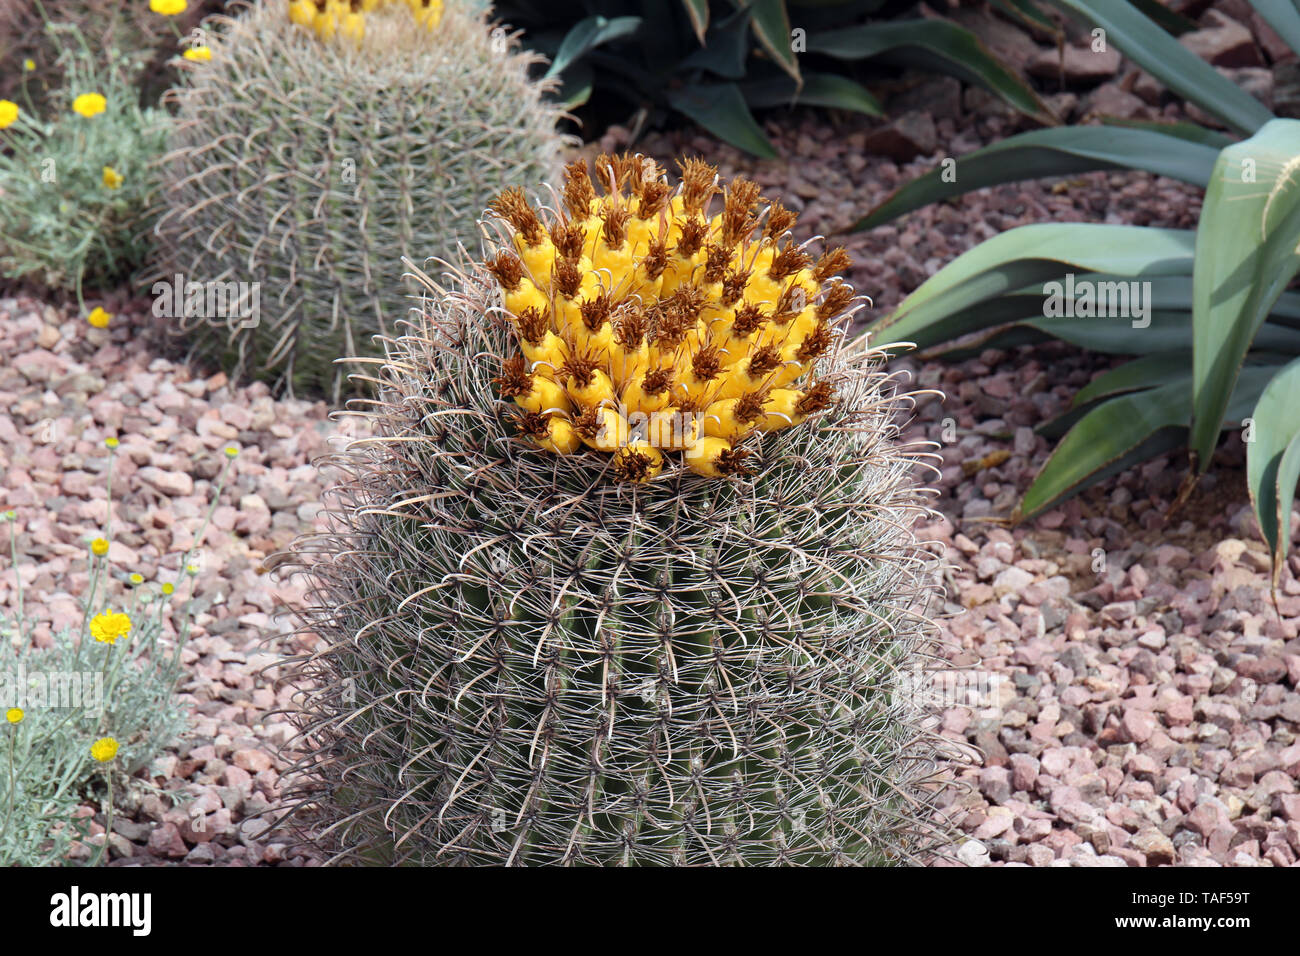 Close up of a flowering Emory's Barrel Cactus in a desert garden in Arizona surrounded by aloe plants and Desert Marigolds Stock Photo